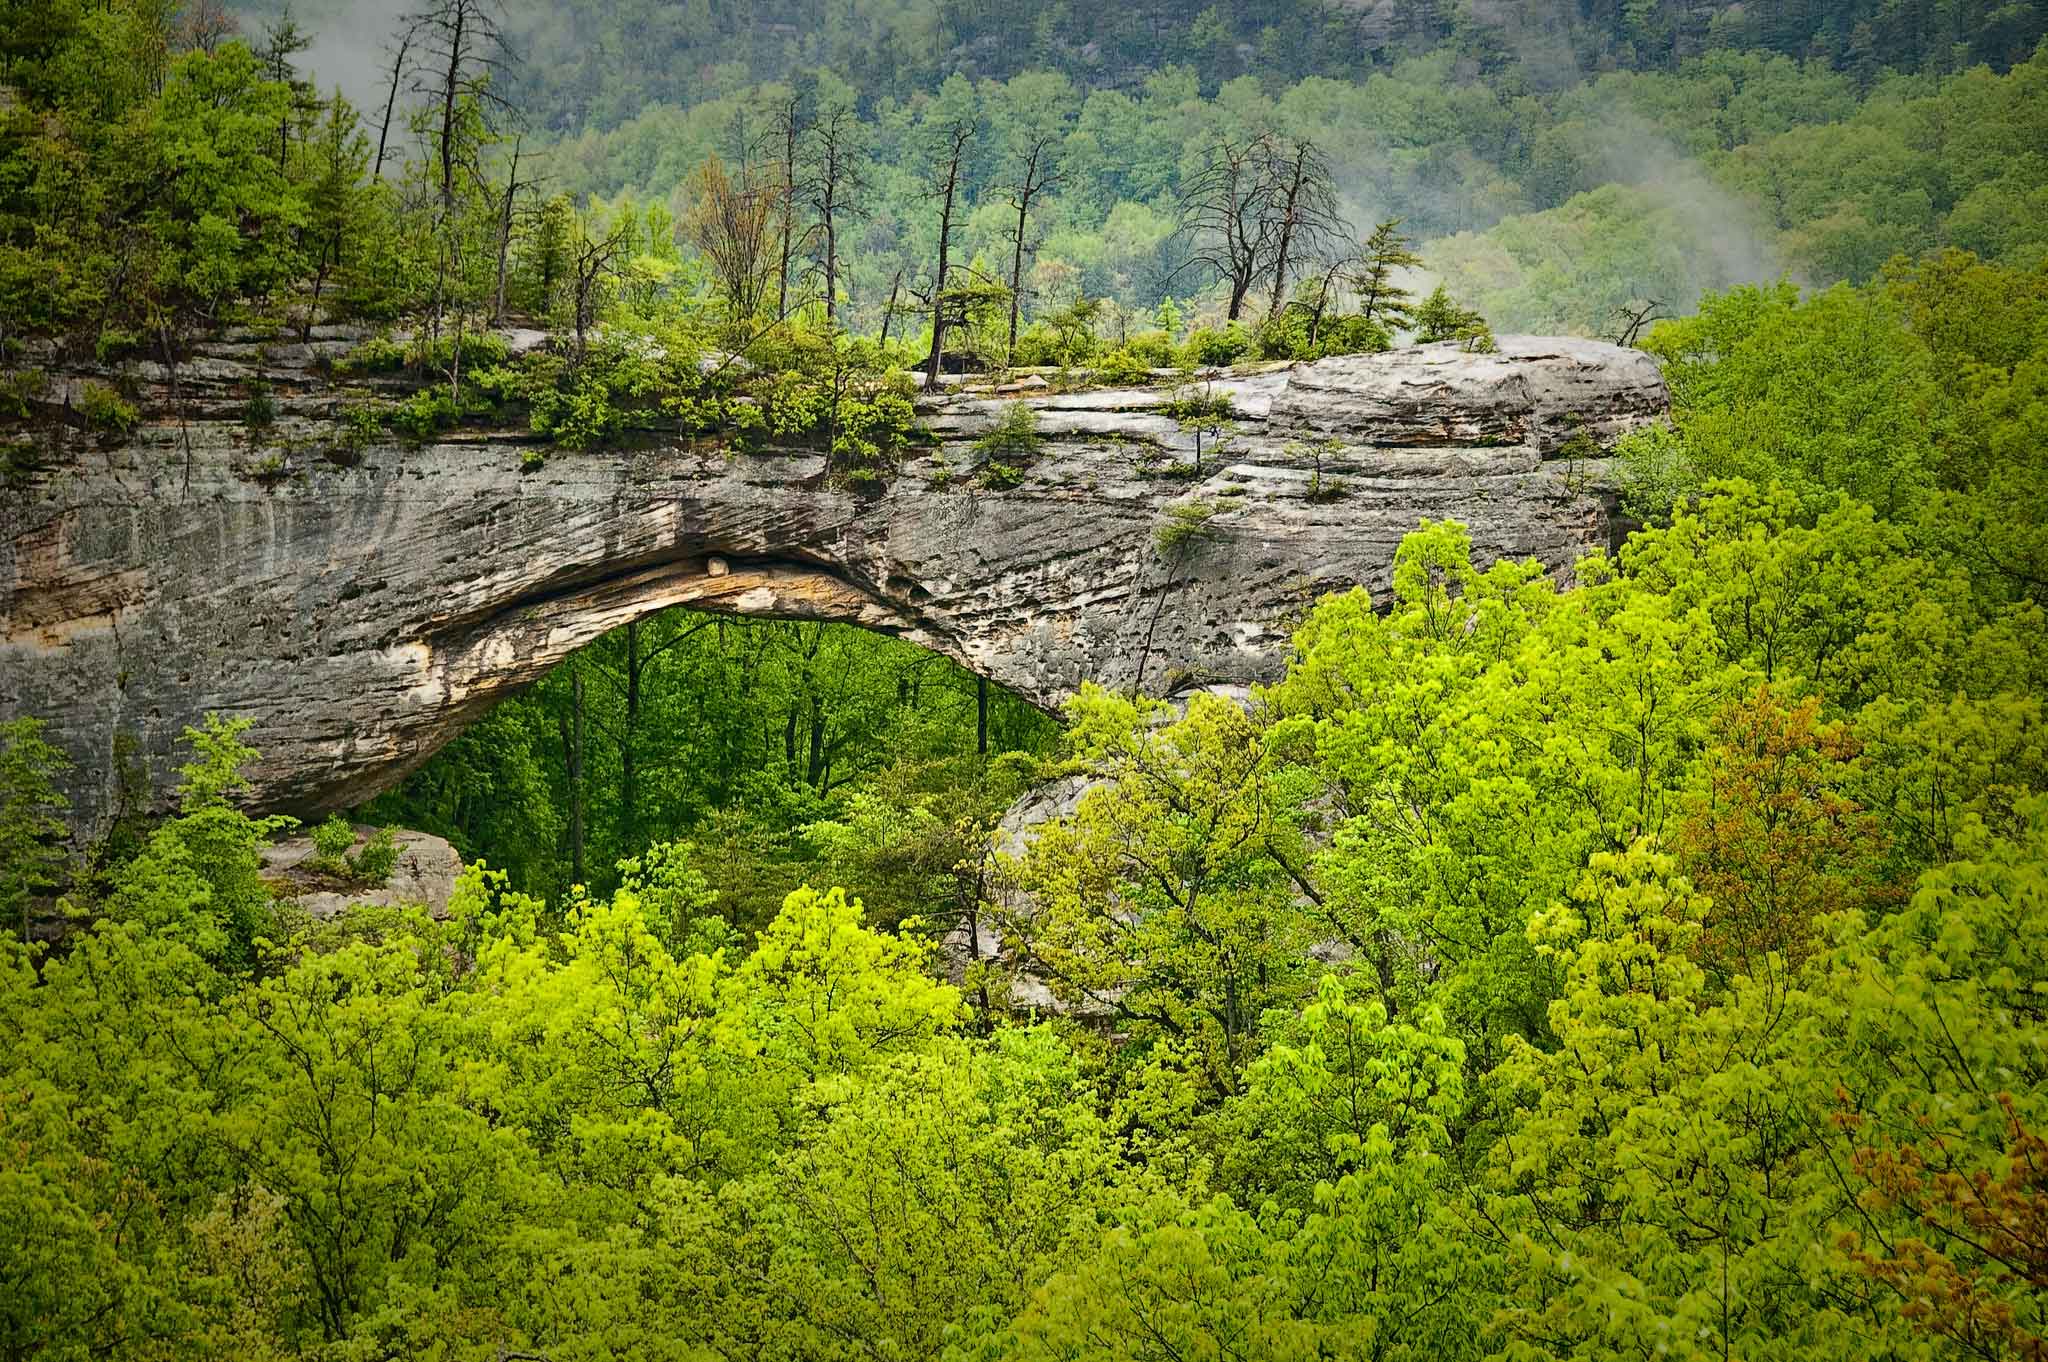 Photograph of a natural arch composed of sandstone in Kentucky.